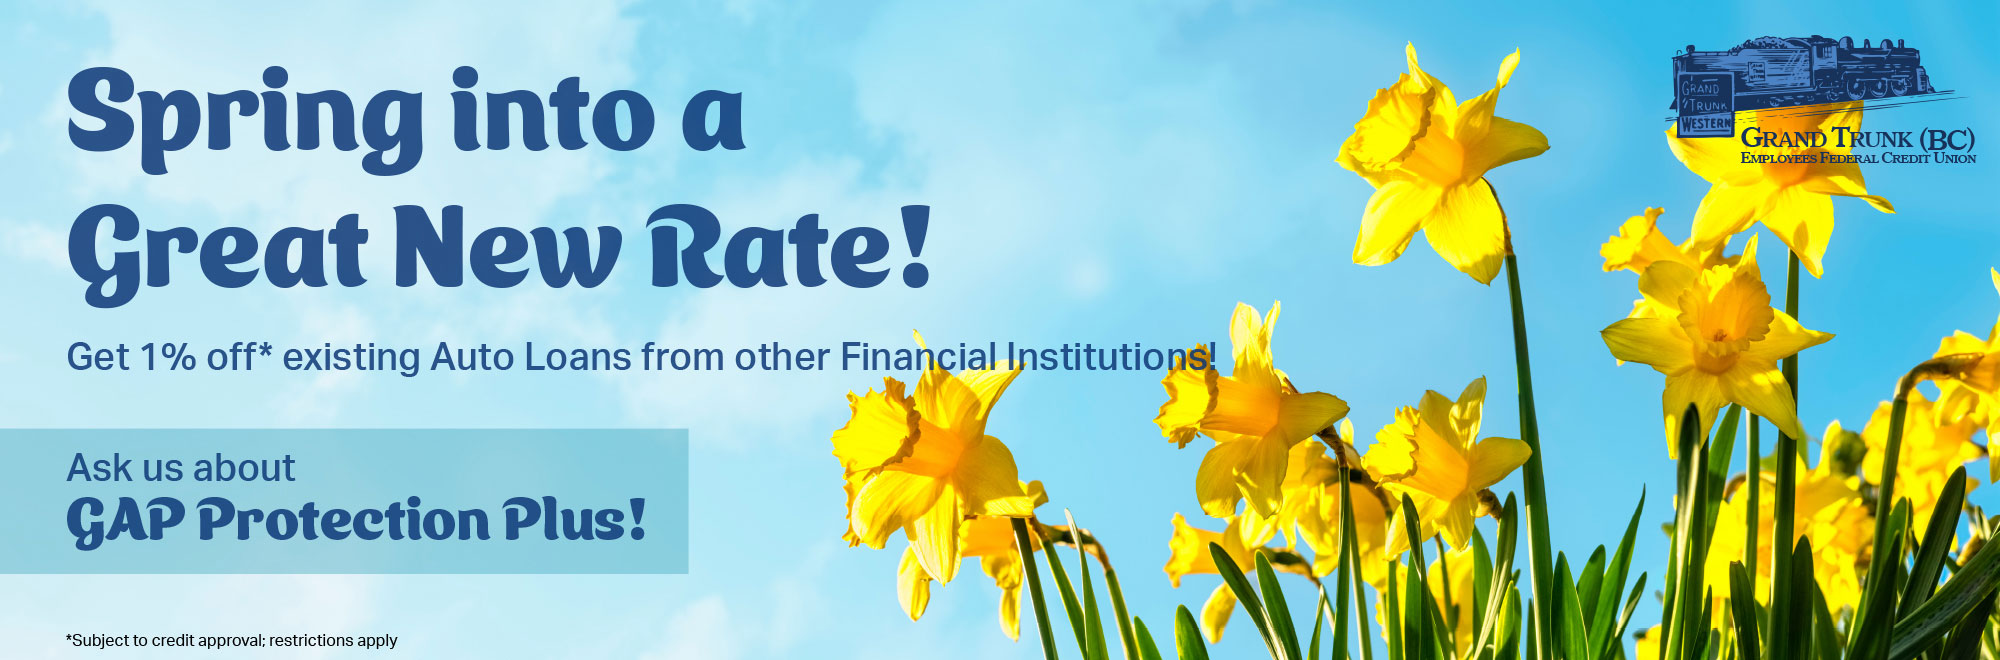 Spring into a Great New Rate! Get 1% off* existing Auto Loans from other Financial Institutions. Ask us about GAP Protection Plus! *Subject to credit approval; restrictions apply